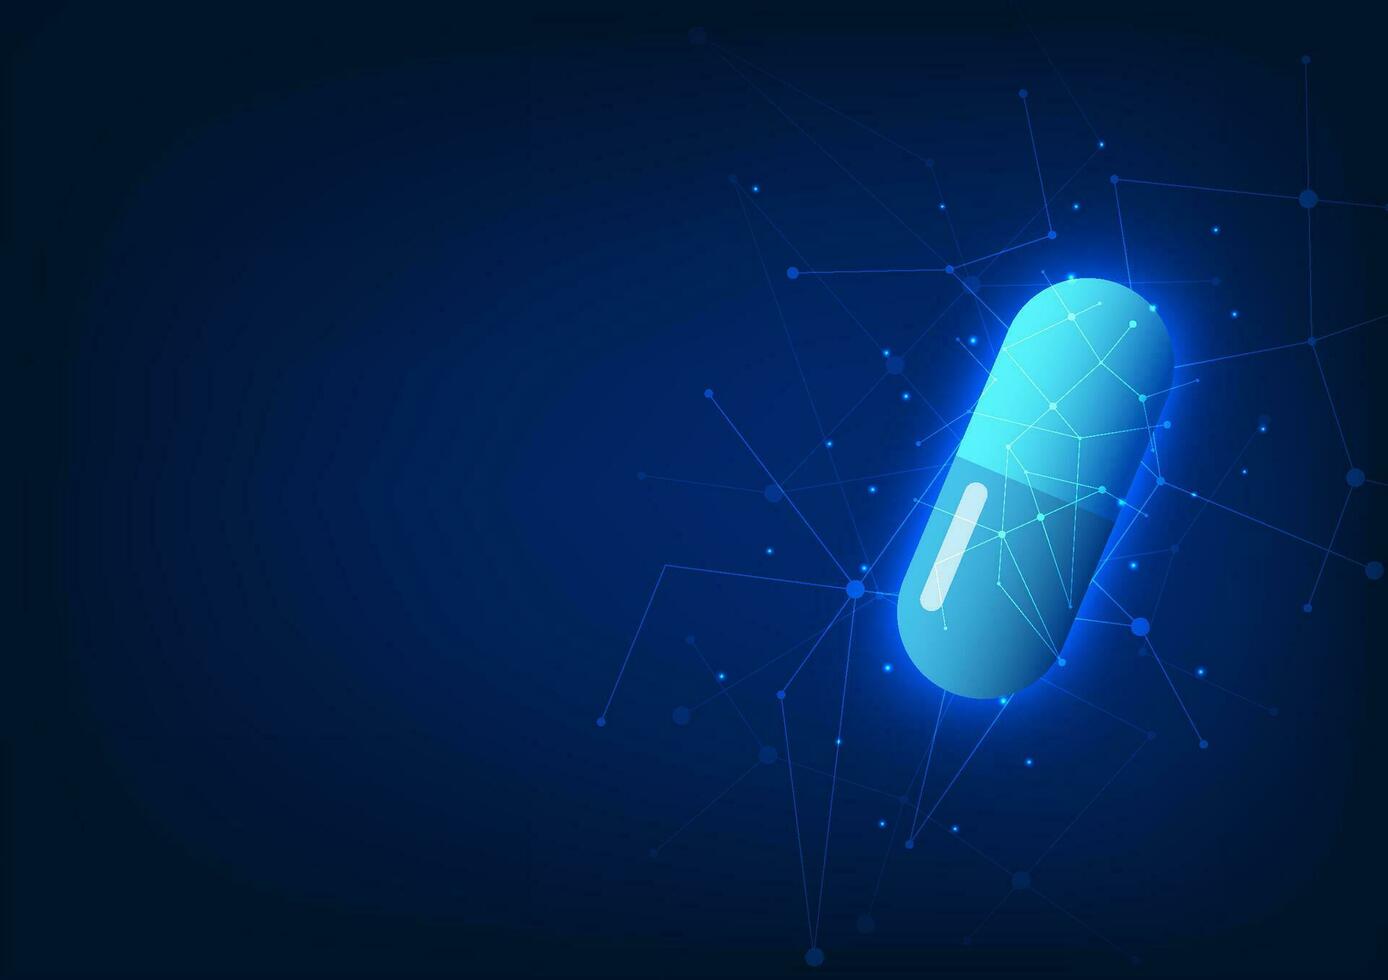 Medical technology The pills are placed on interconnected lines. Technology combined with medicine has led to the development of effective drugs and cures for emerging diseases. vector